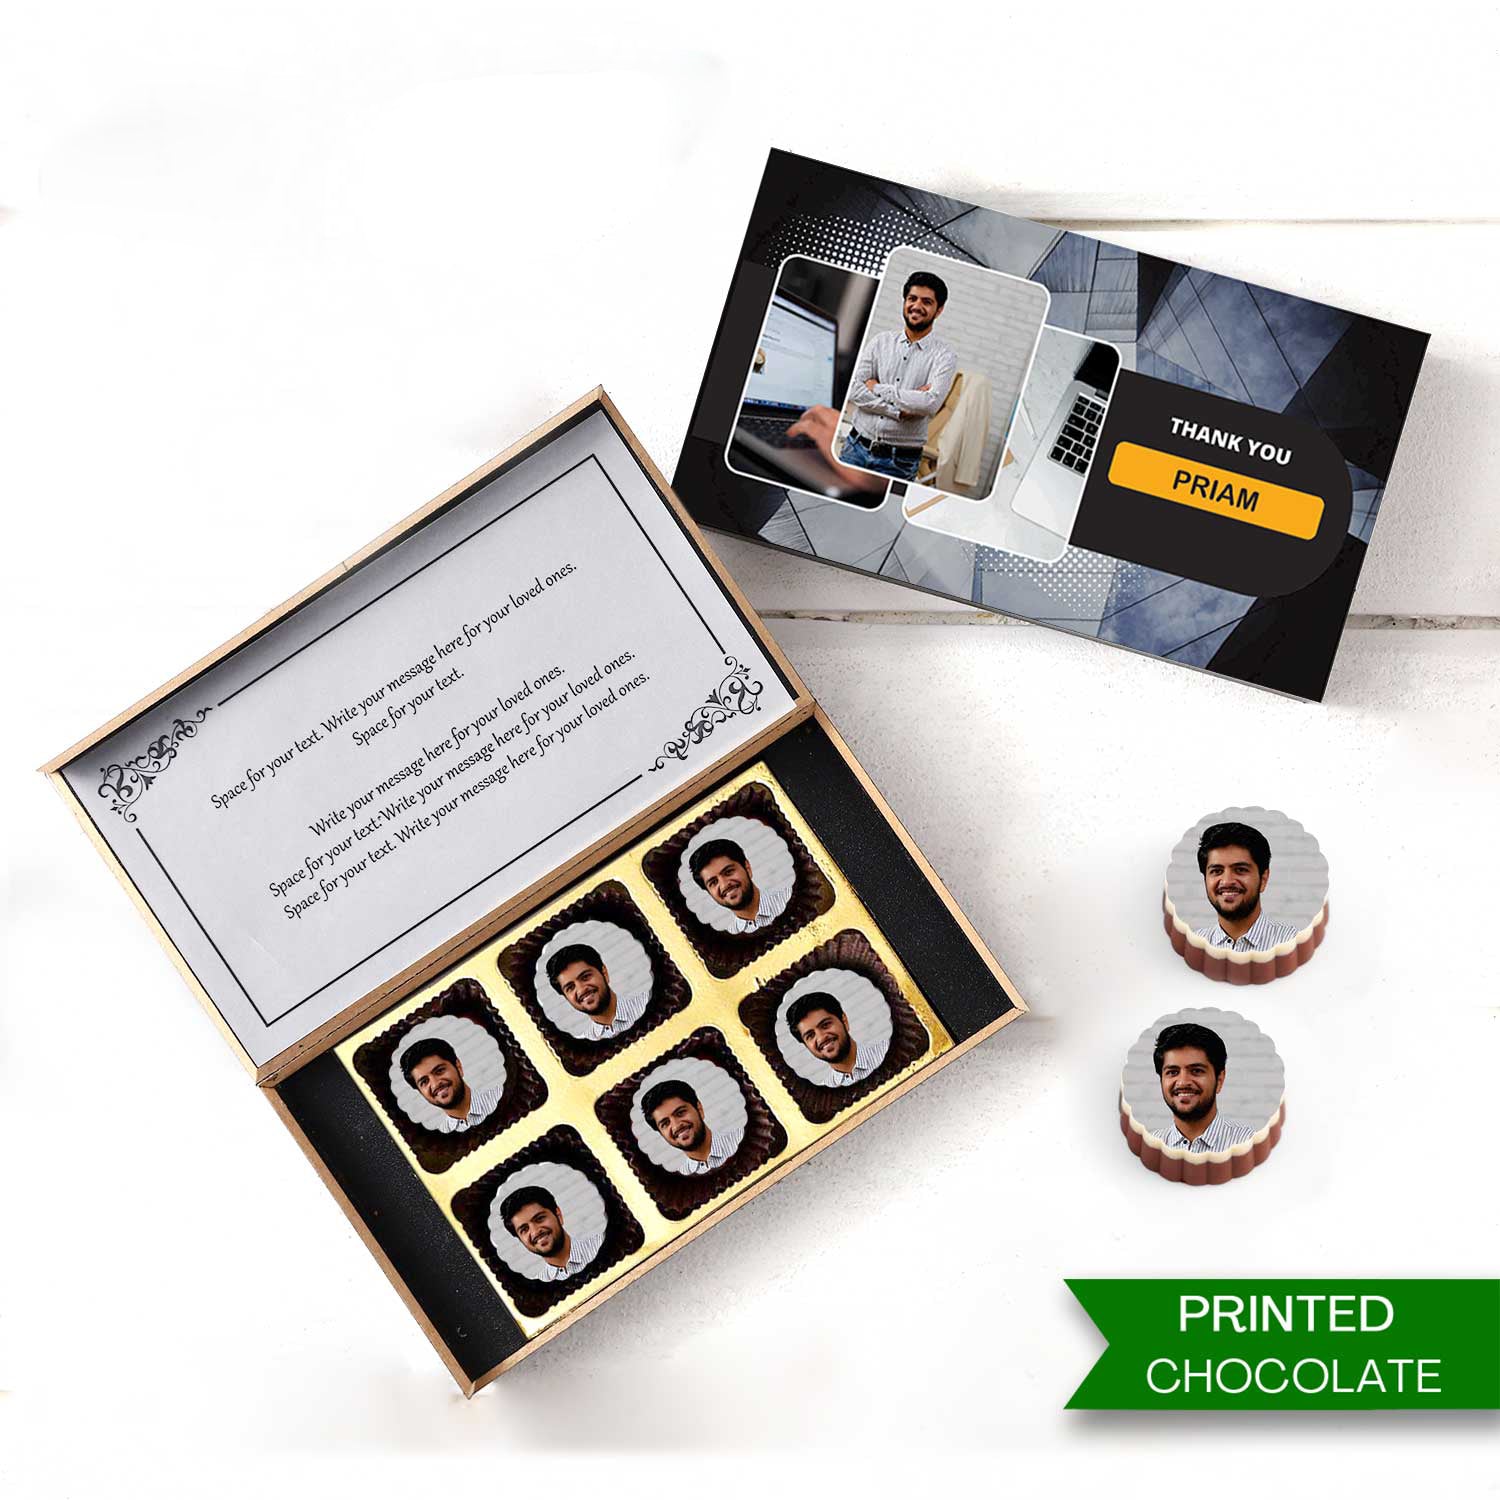 Premium Customised Chocolate Gifts for Thank you - Choco ManualART